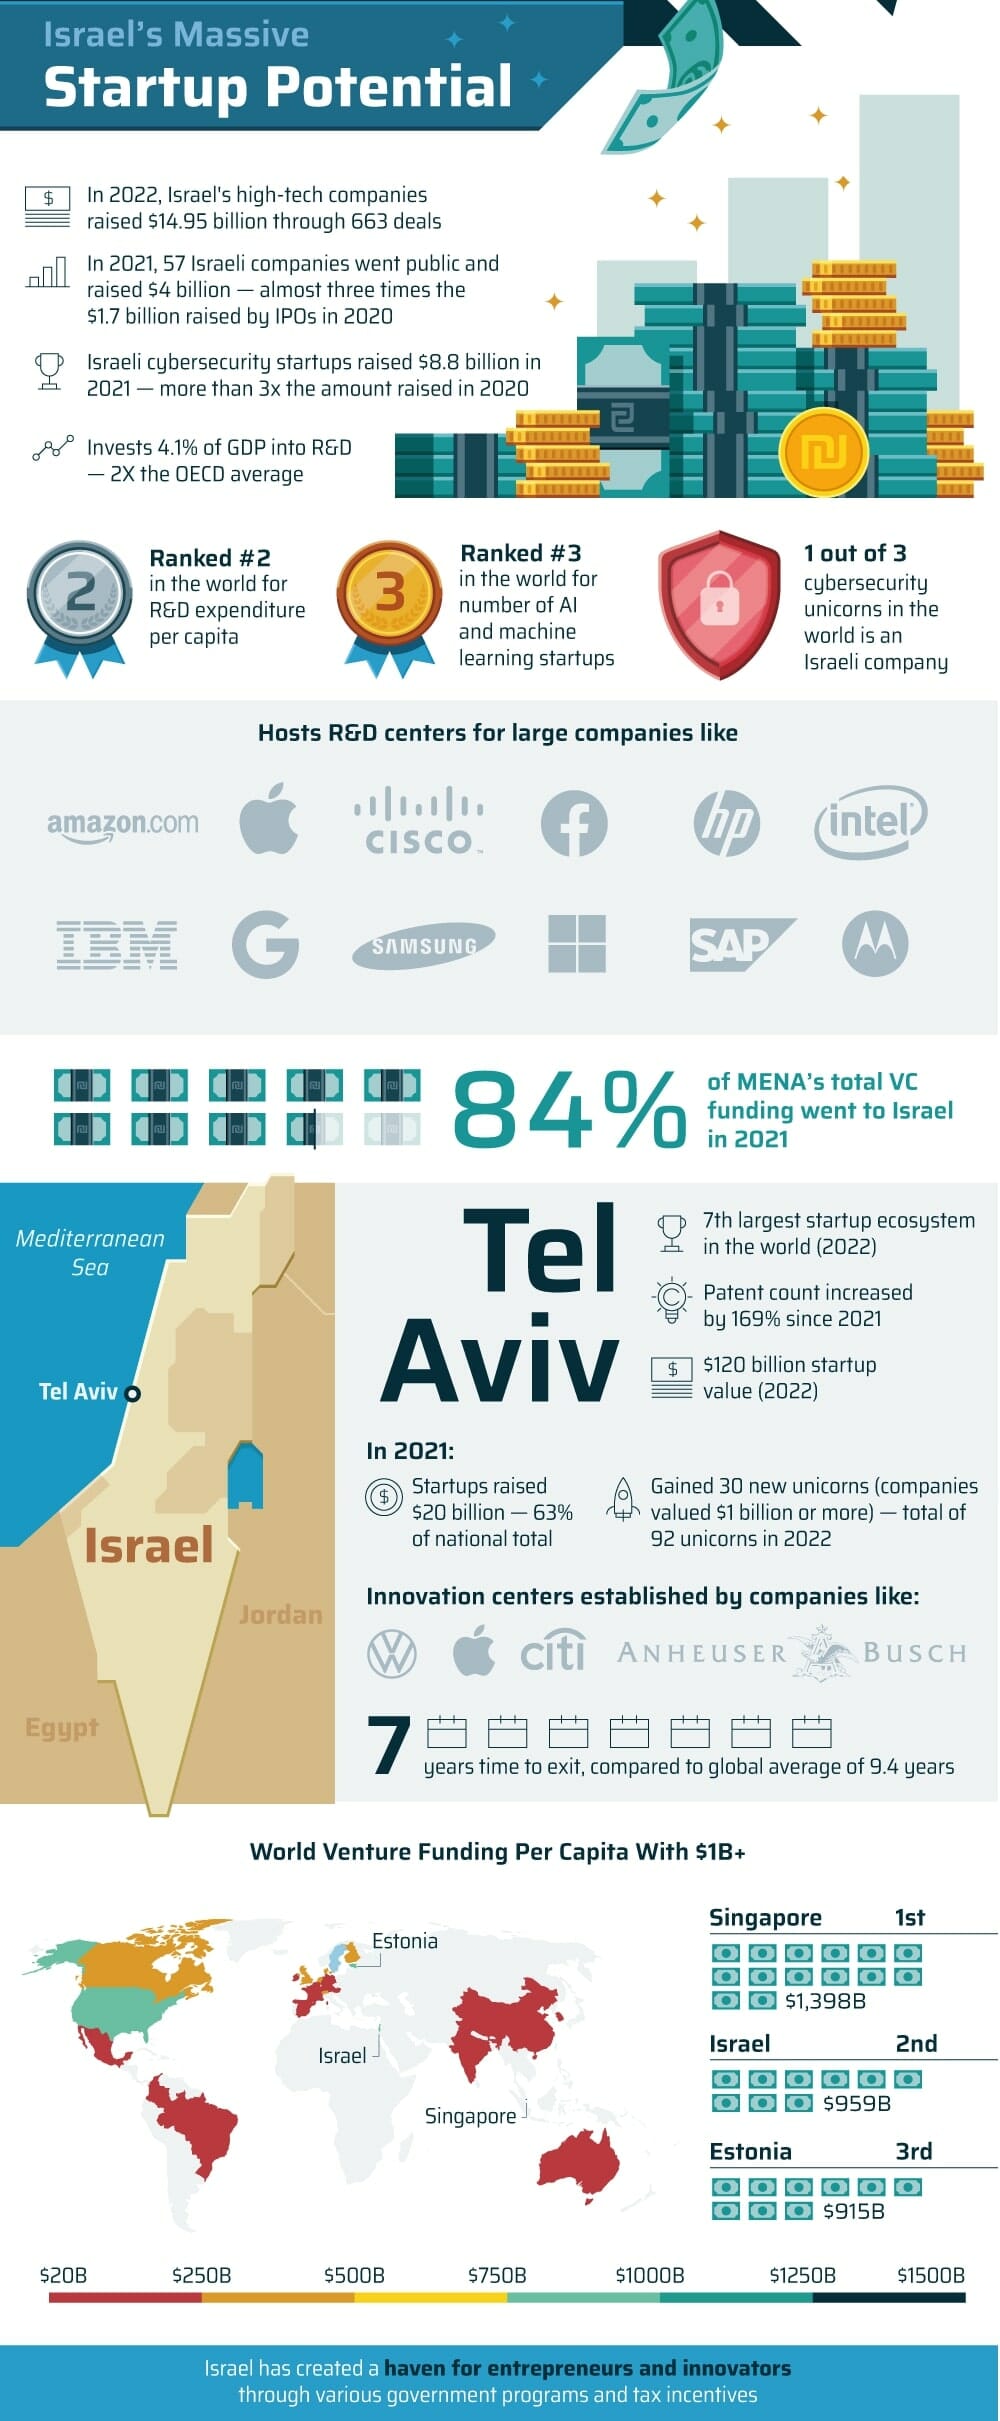 How Israel Has Become A Major World Player In Tech Startups